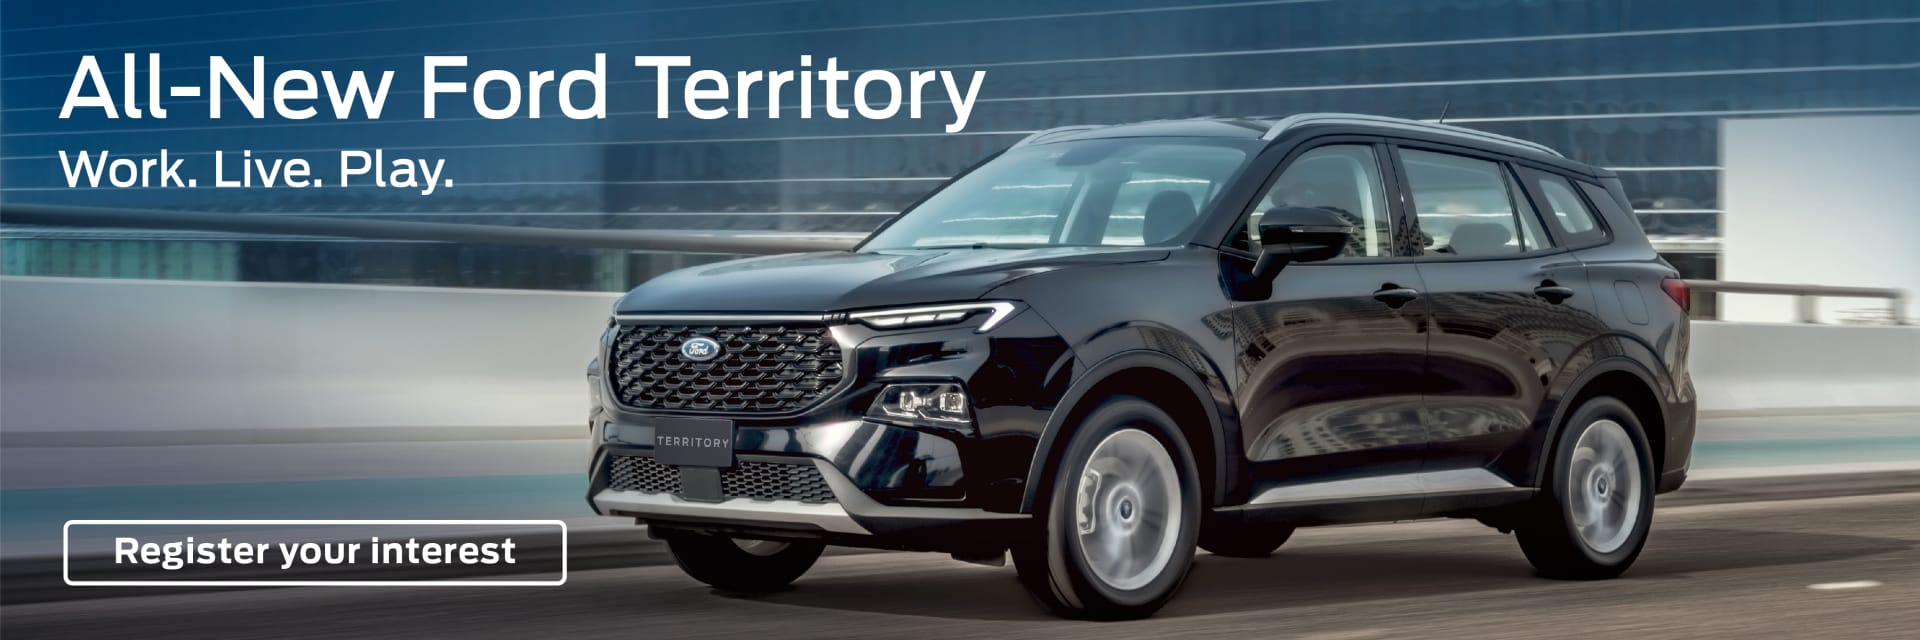 All-New Ford Territory